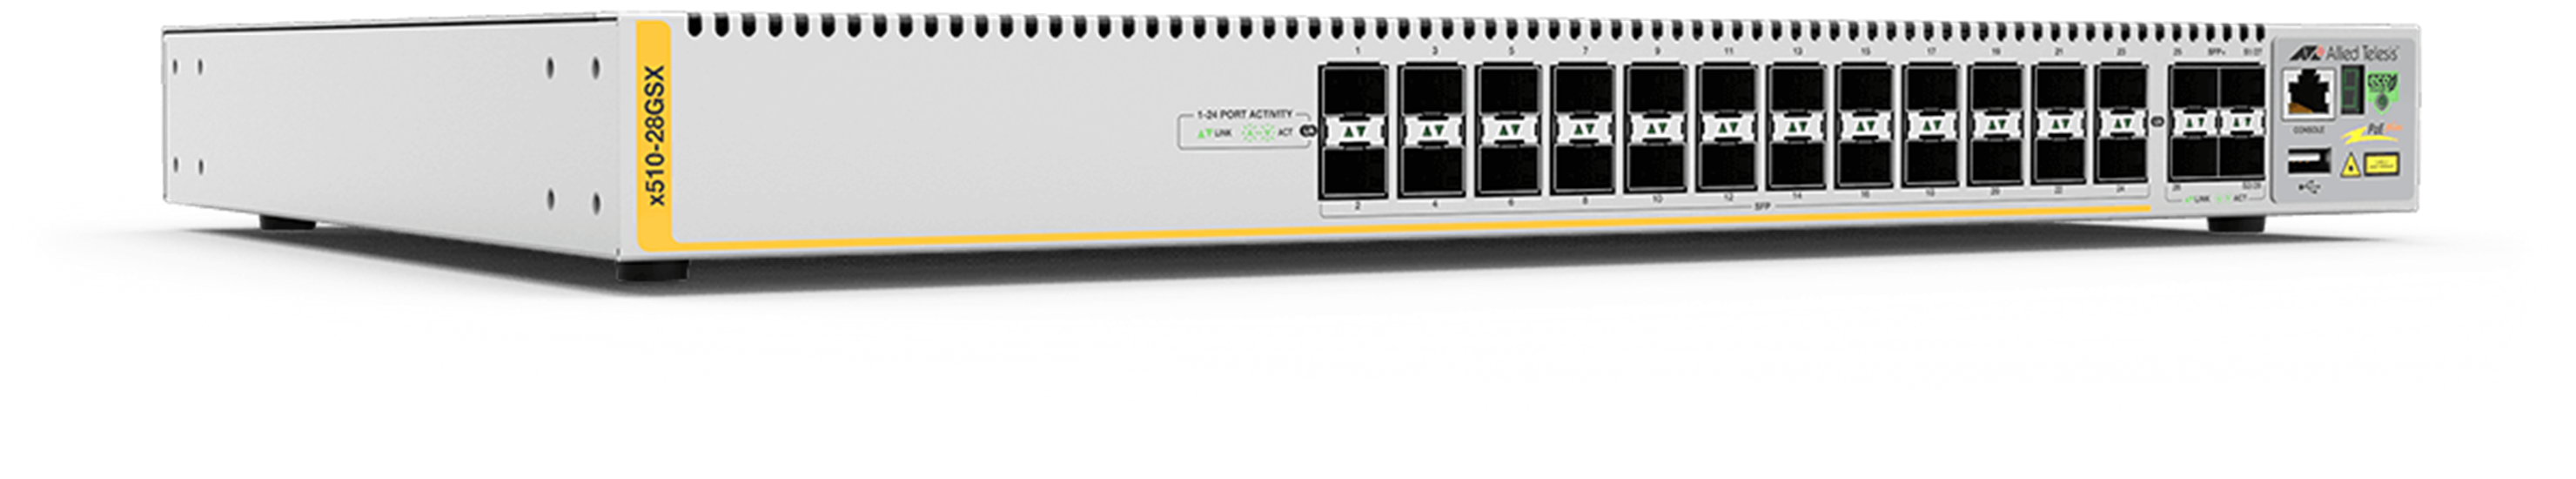 AT-x510L series - Advanced Gigabit Layer 3 Stackable Switch